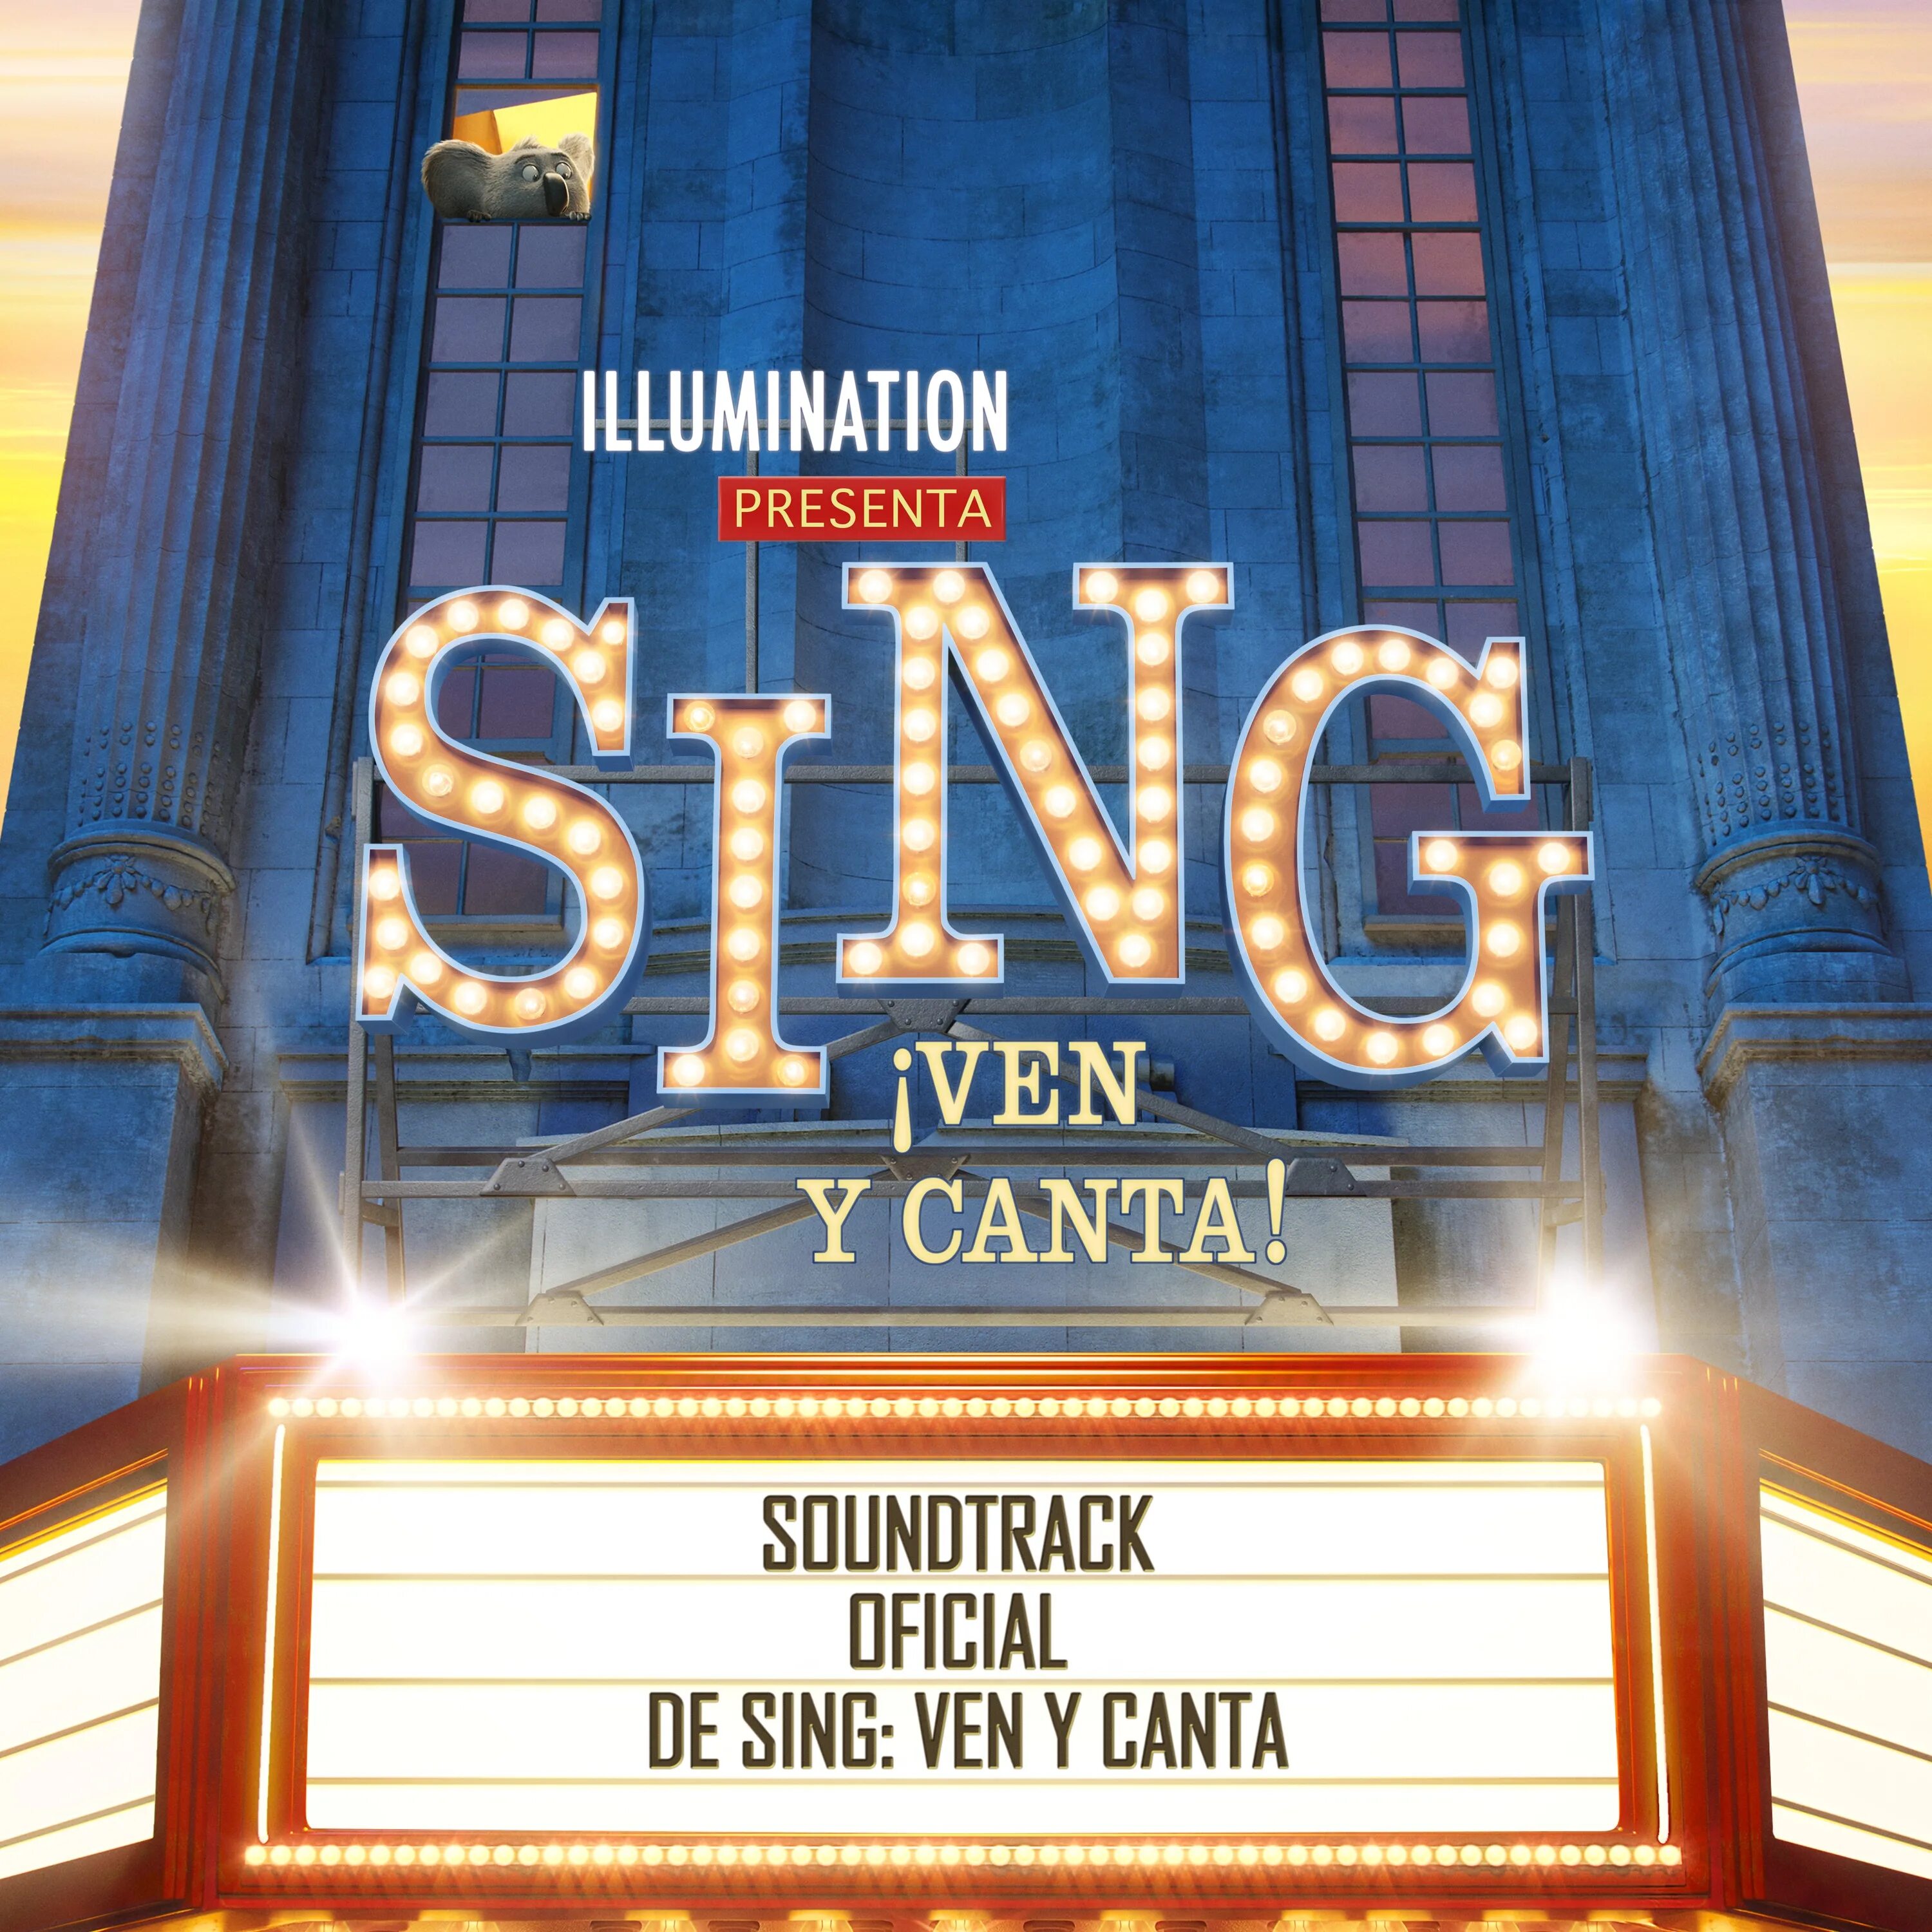 Sing soundtrack. Sing 2 Soundtrack. OST Sing album. Картинки афиши Sing Soundtrack. Sing Motion picture.